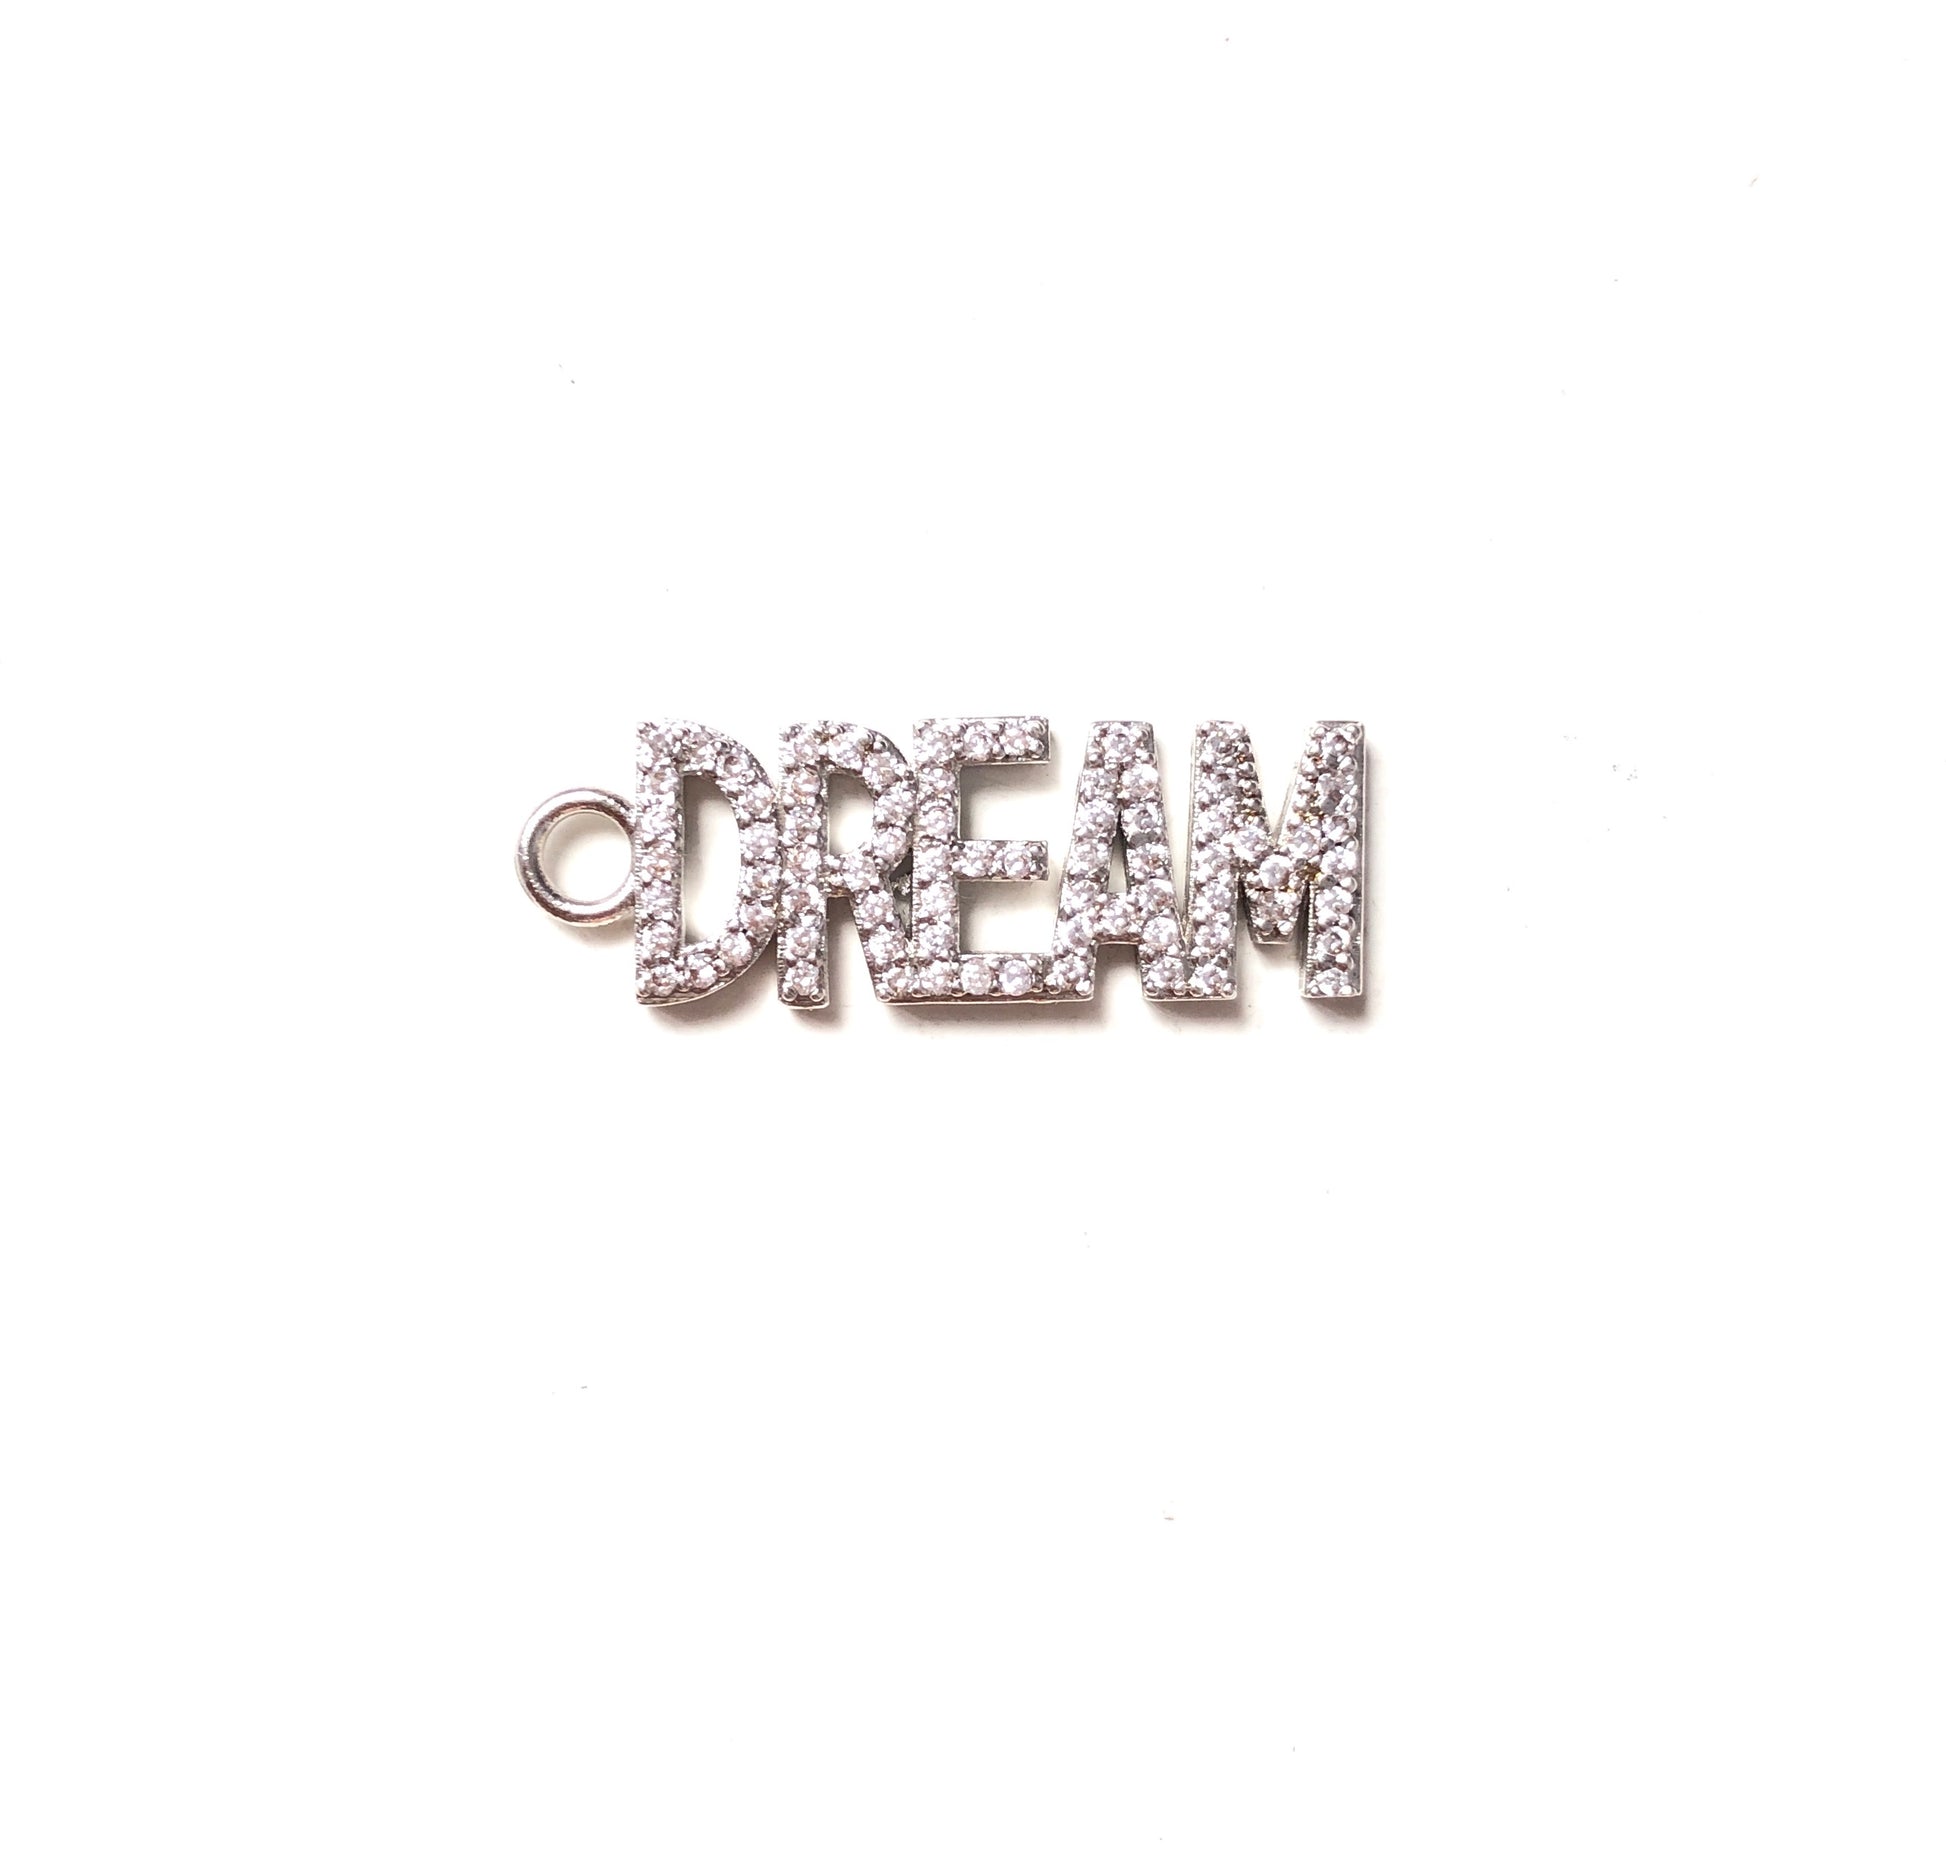 10pcs/lot Silver CZ Paved Letter Charms DREAM-10pcs CZ Paved Charms Love Letters Mother's Day Words & Quotes Charms Beads Beyond